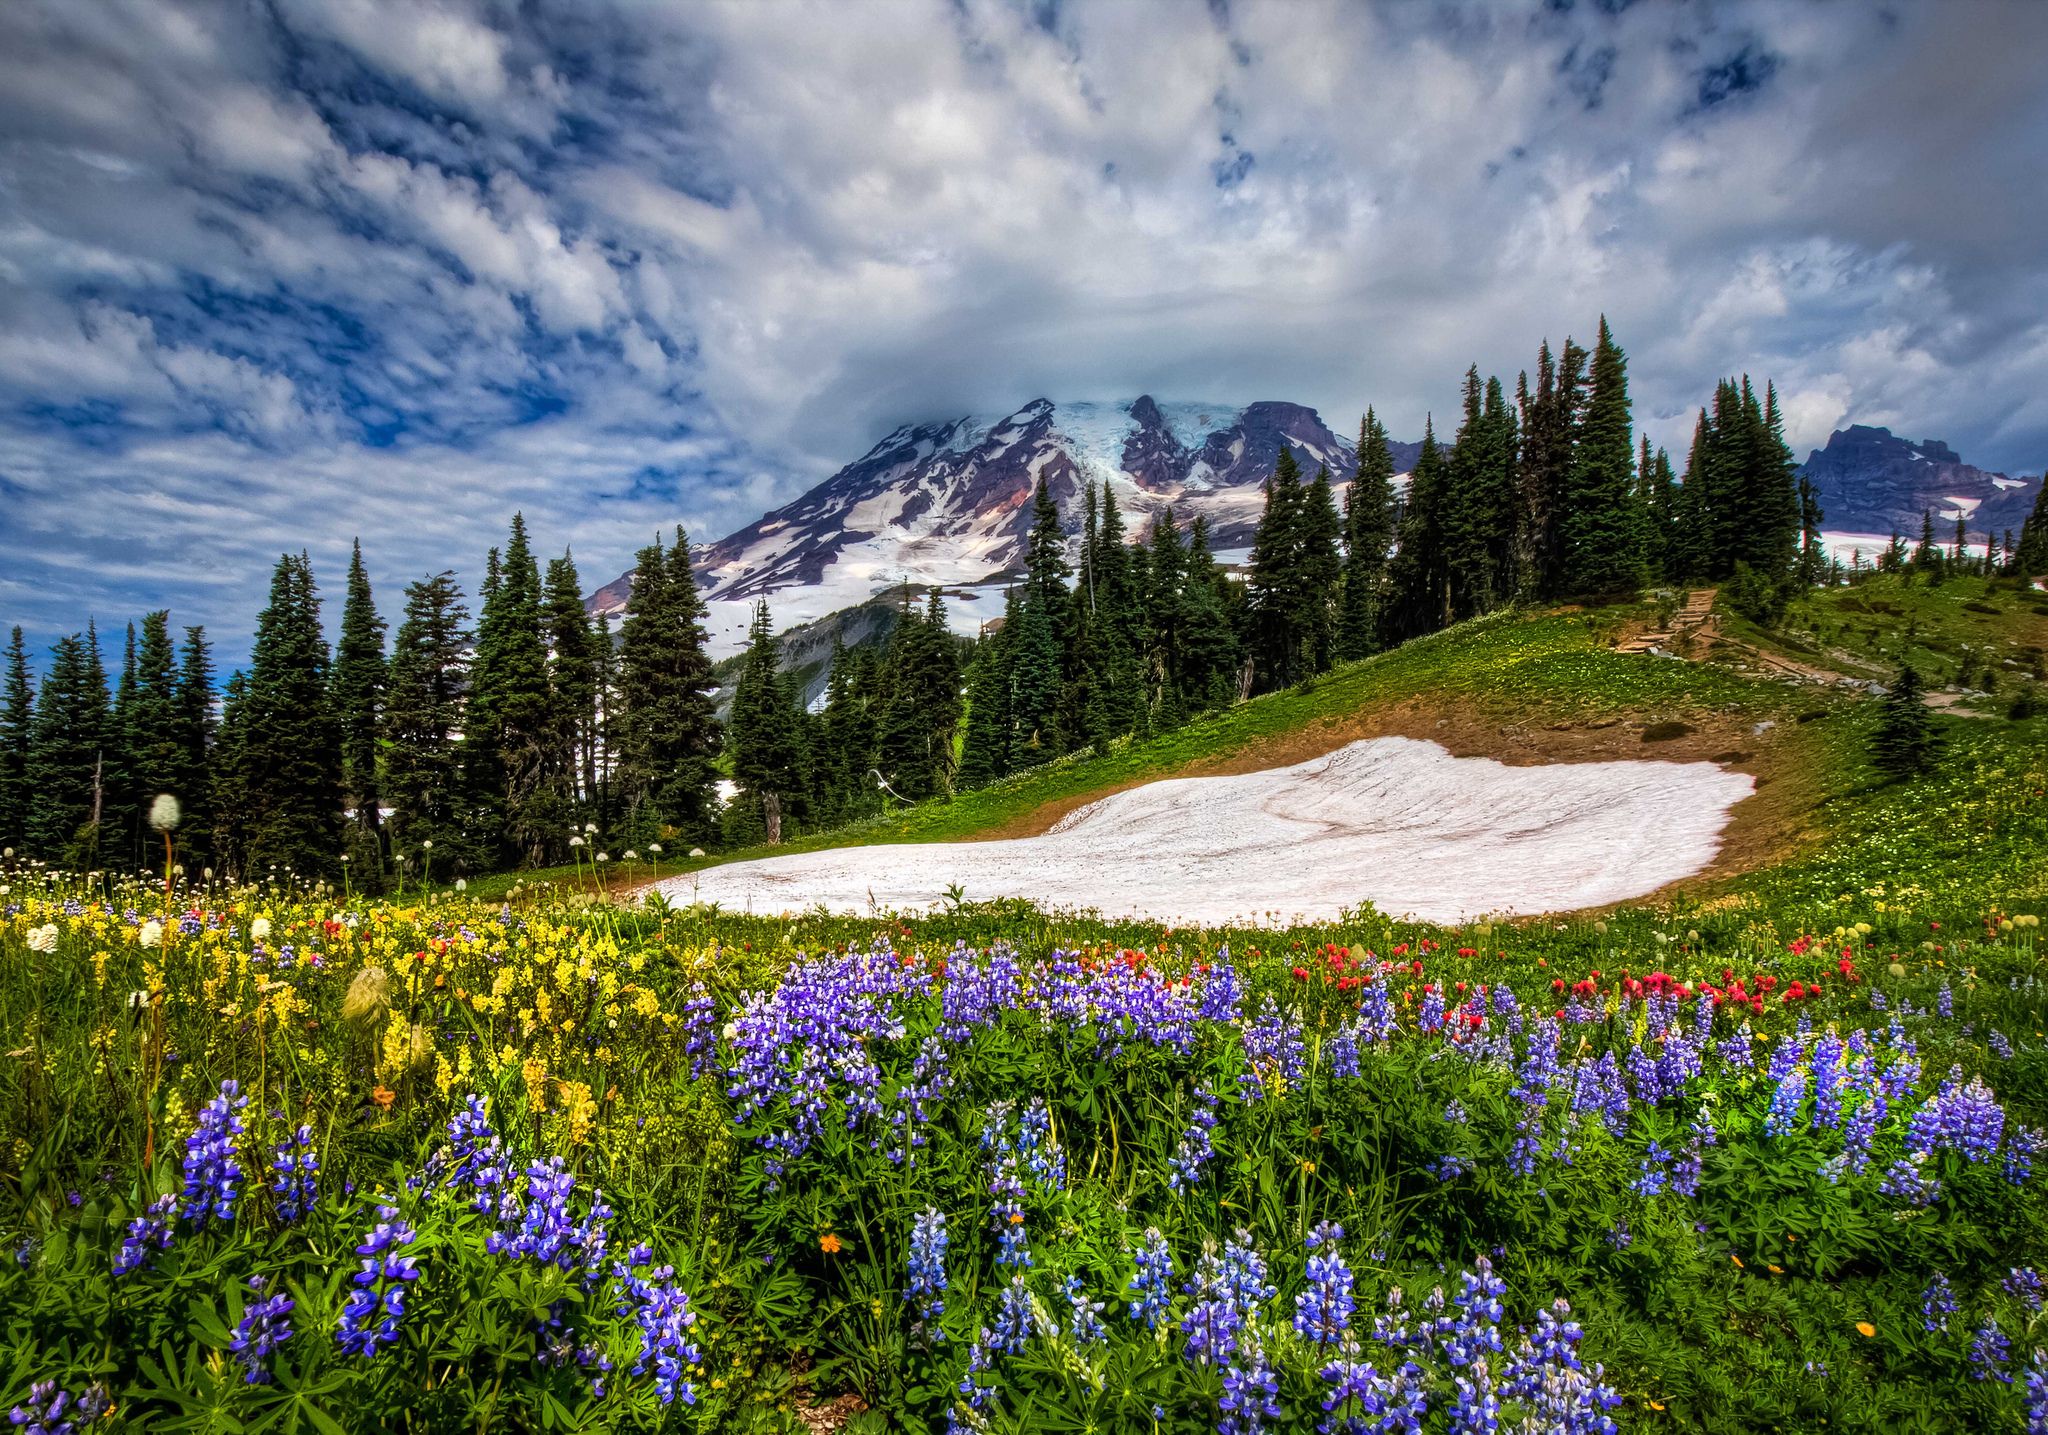 Wildflowers in the Mountains HD Wallpaper. Background Image